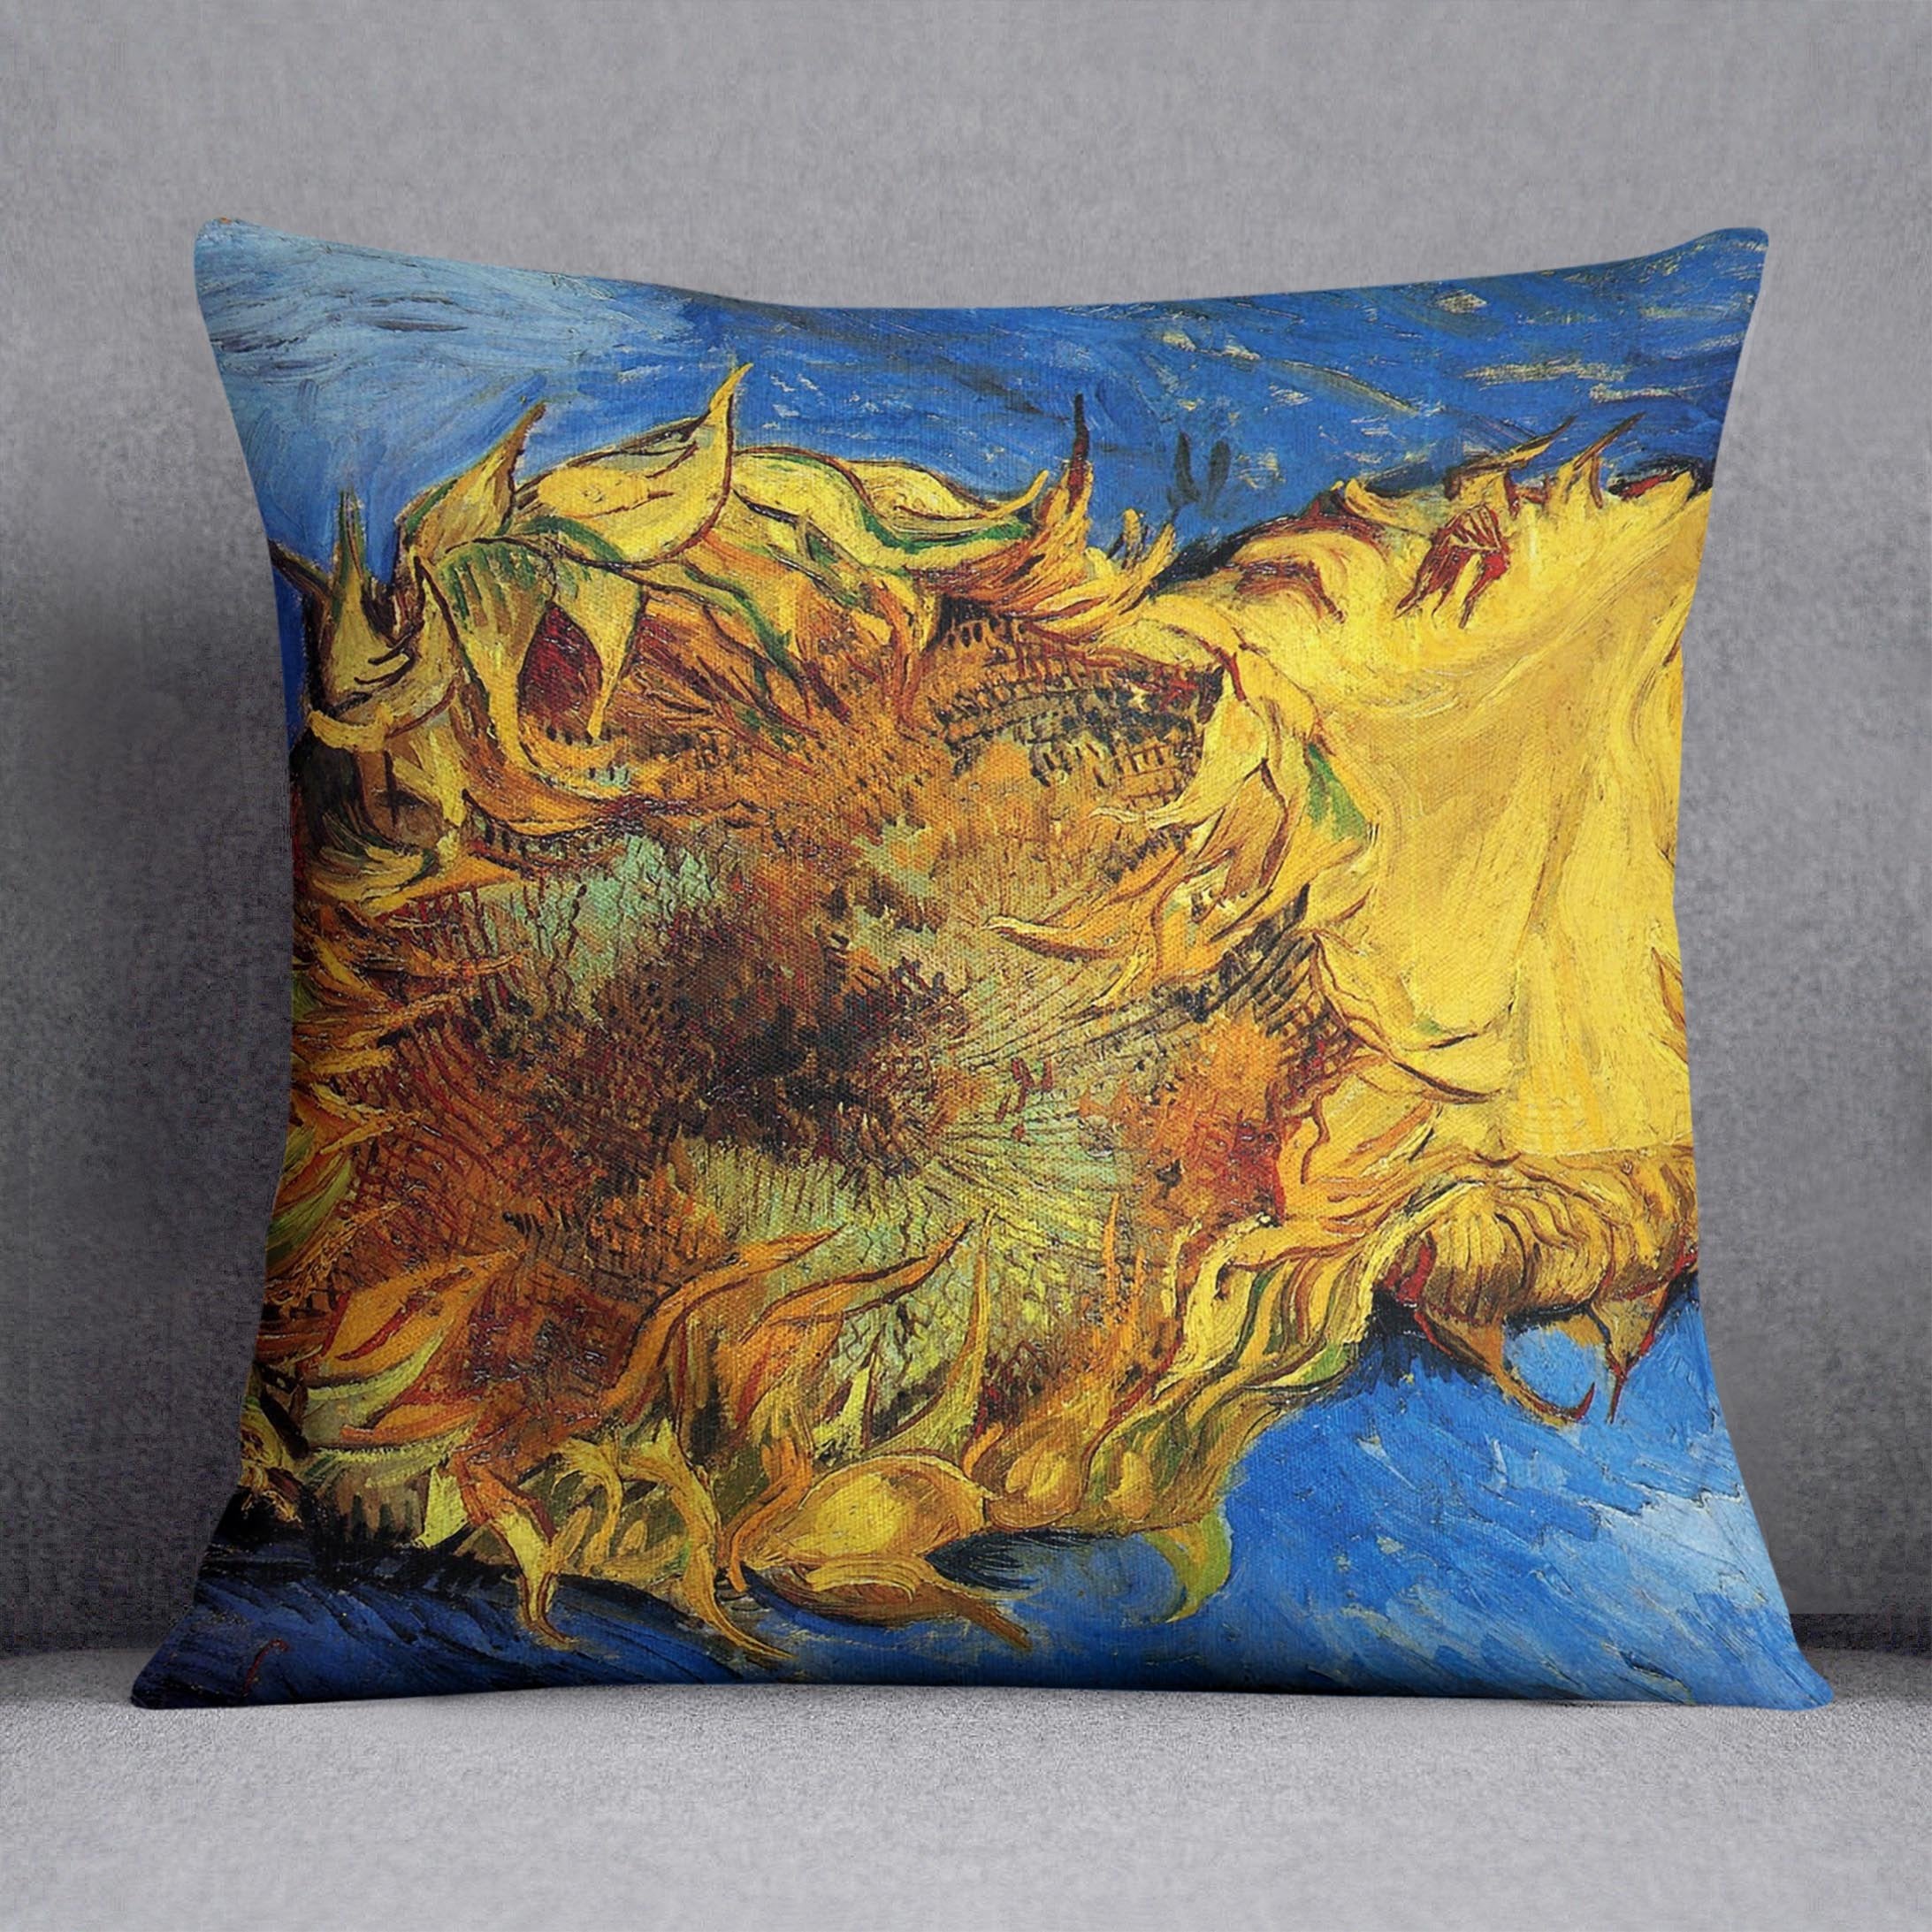 Two Cut Sunflowers 3 by Van Gogh Throw Pillow